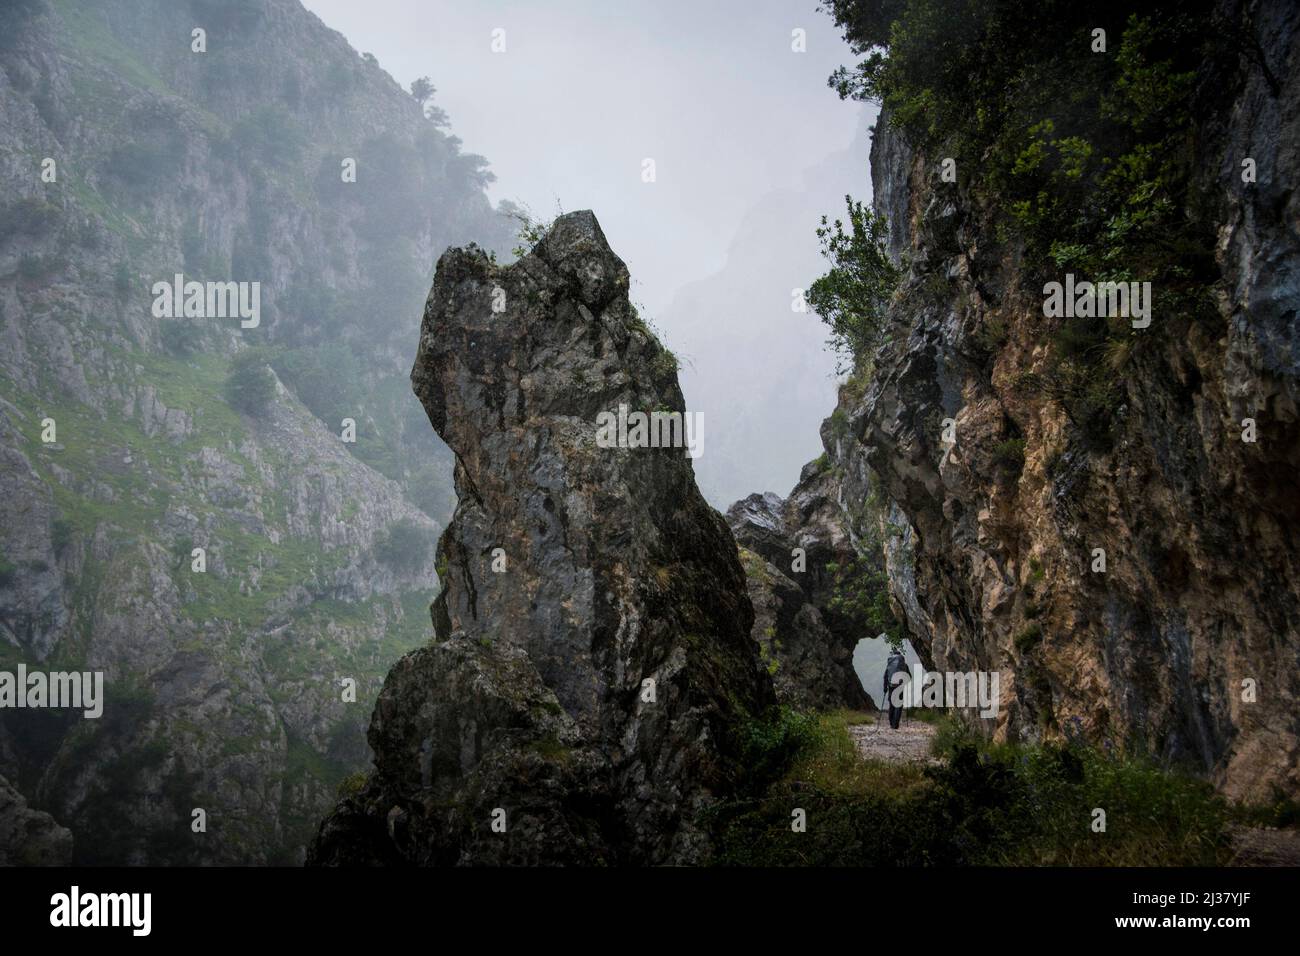 Hiker walks along the trail in the cliffs near the edge in a foggy rainy day Stock Photo